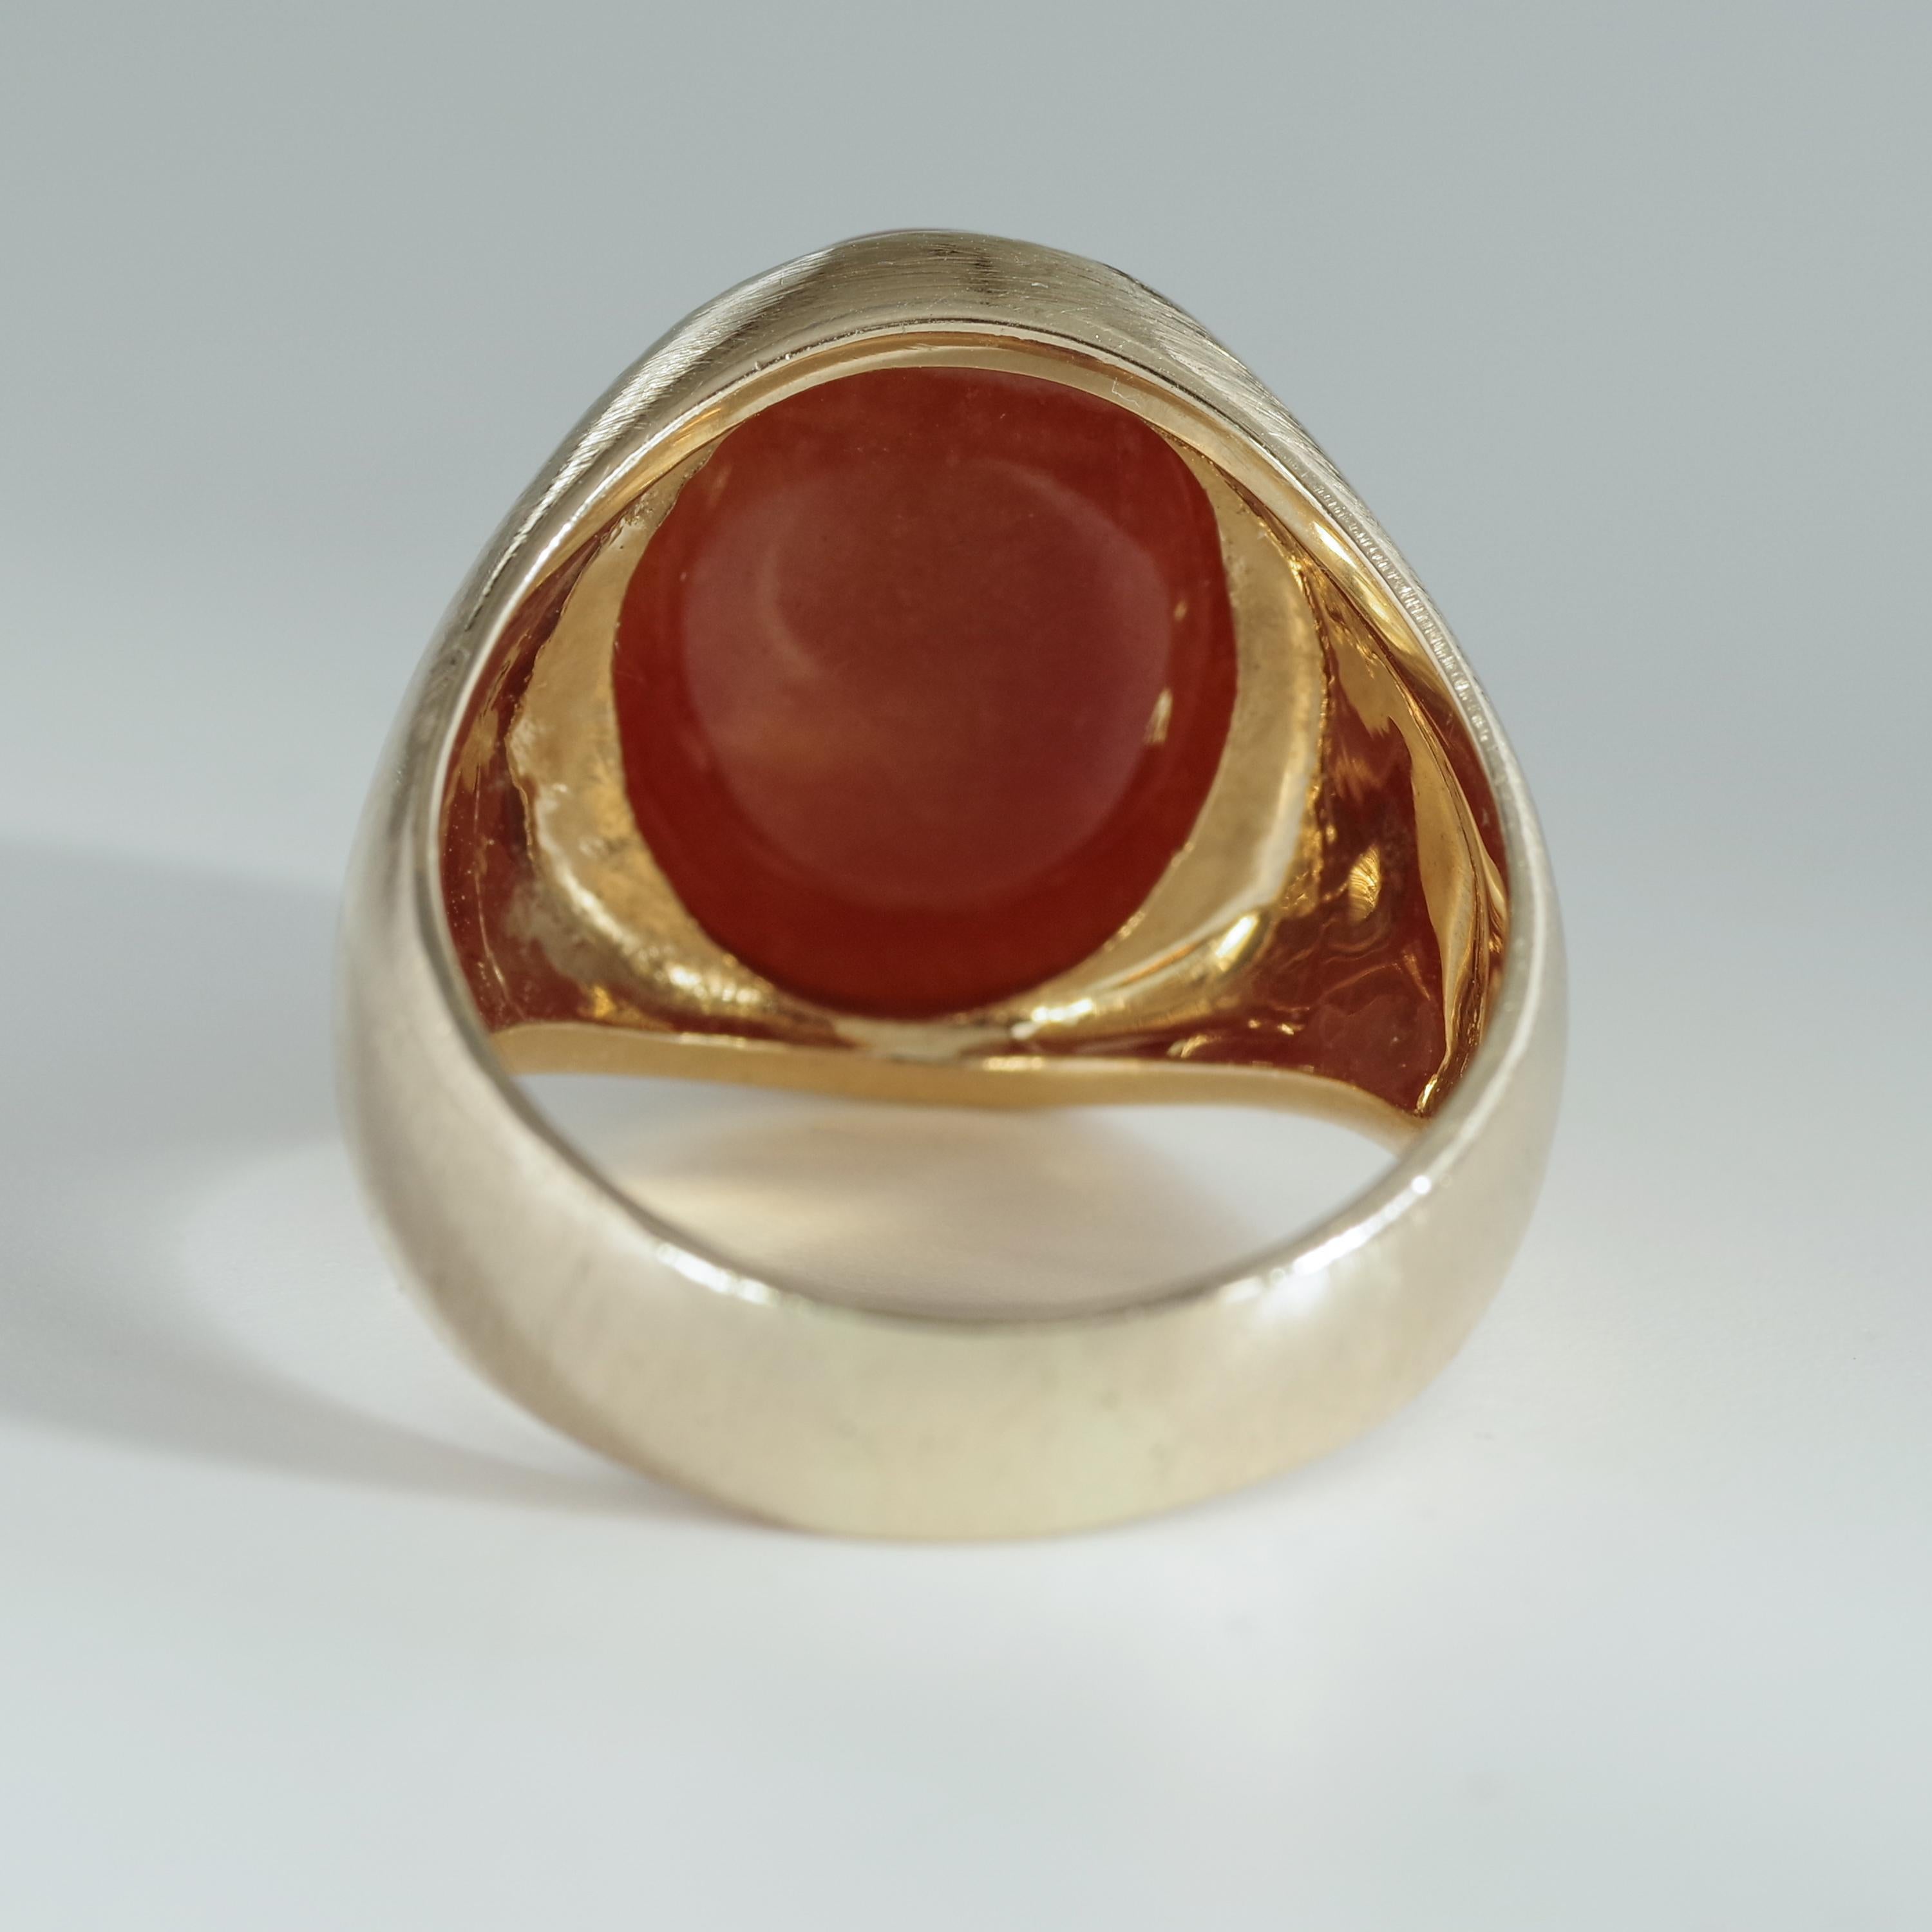 Certified Untreated Red Jade Ring from Midcentury 4